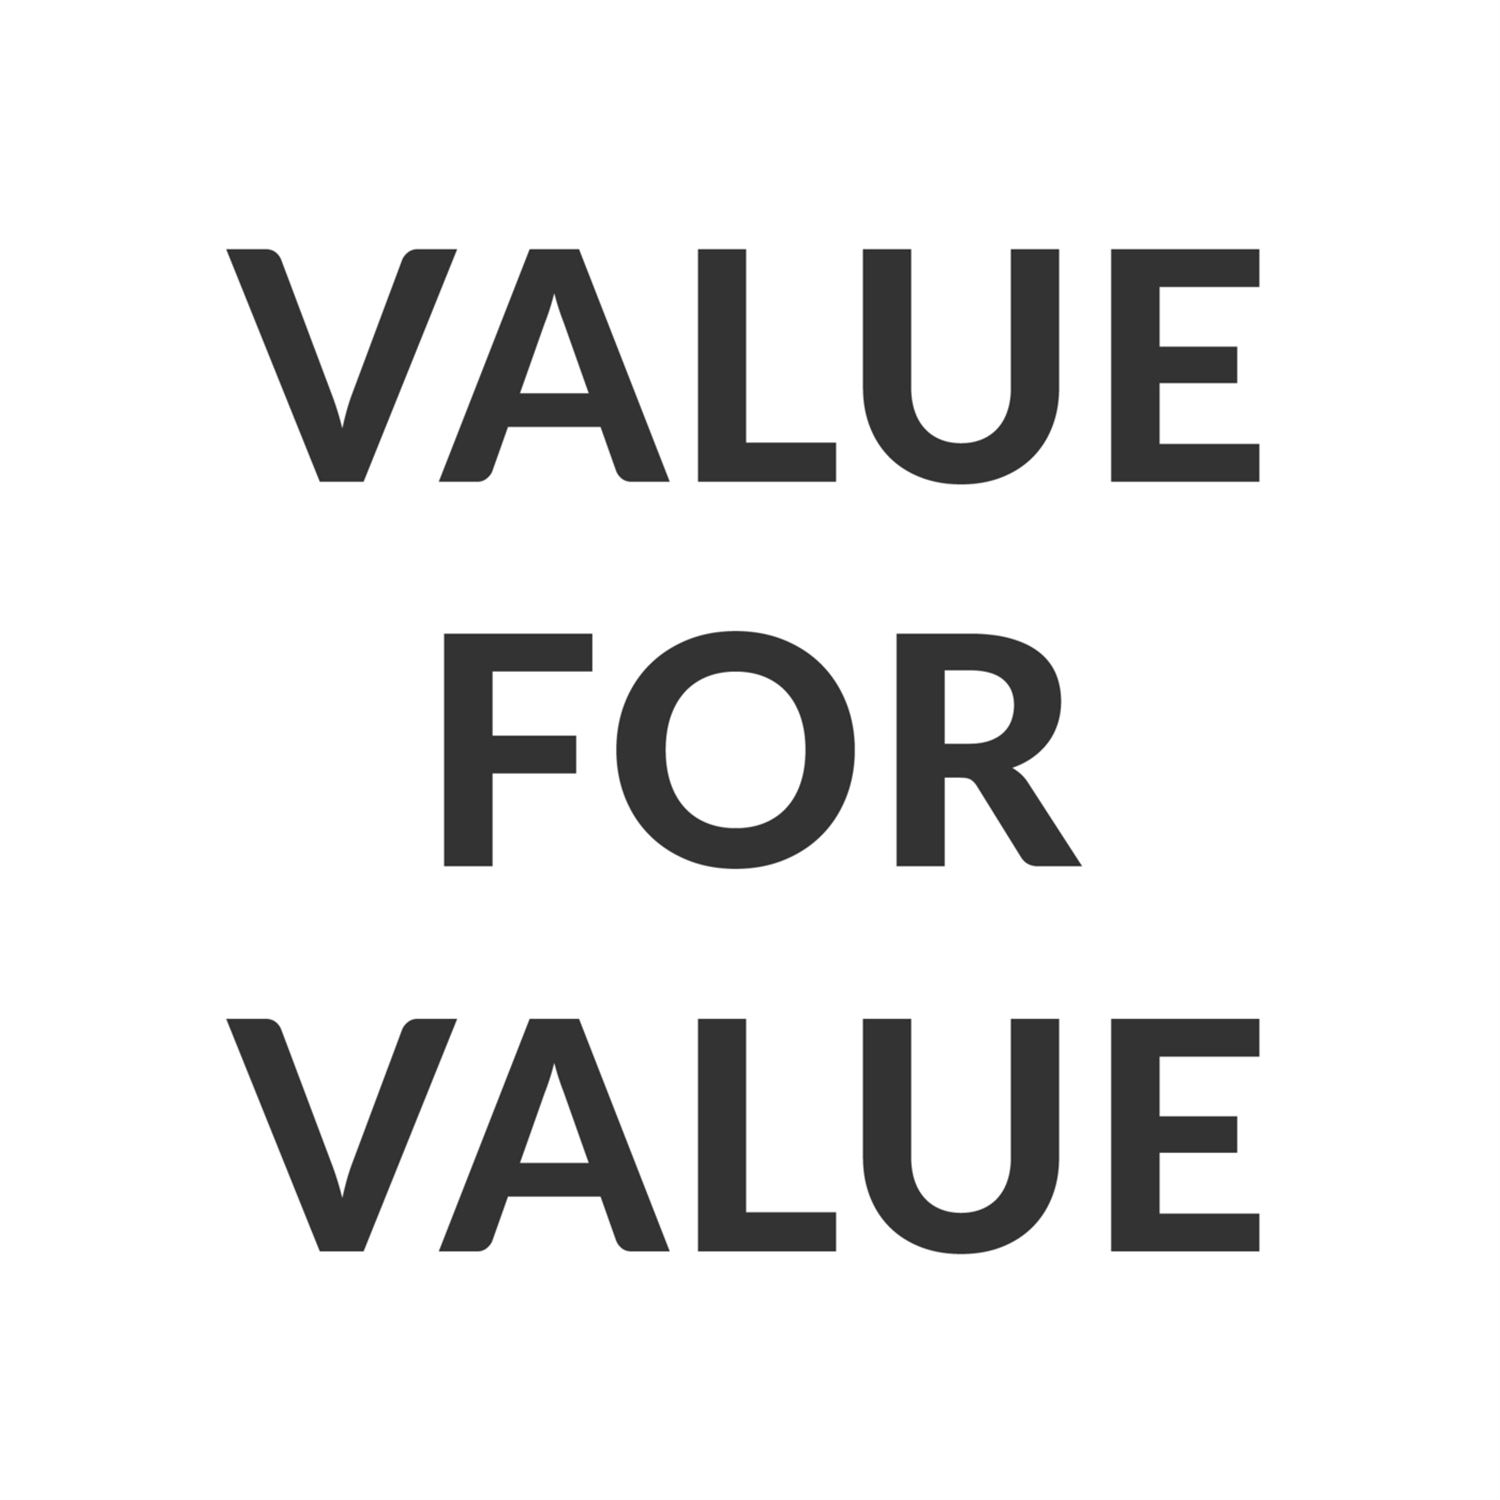 Value for value: we're symbiotic